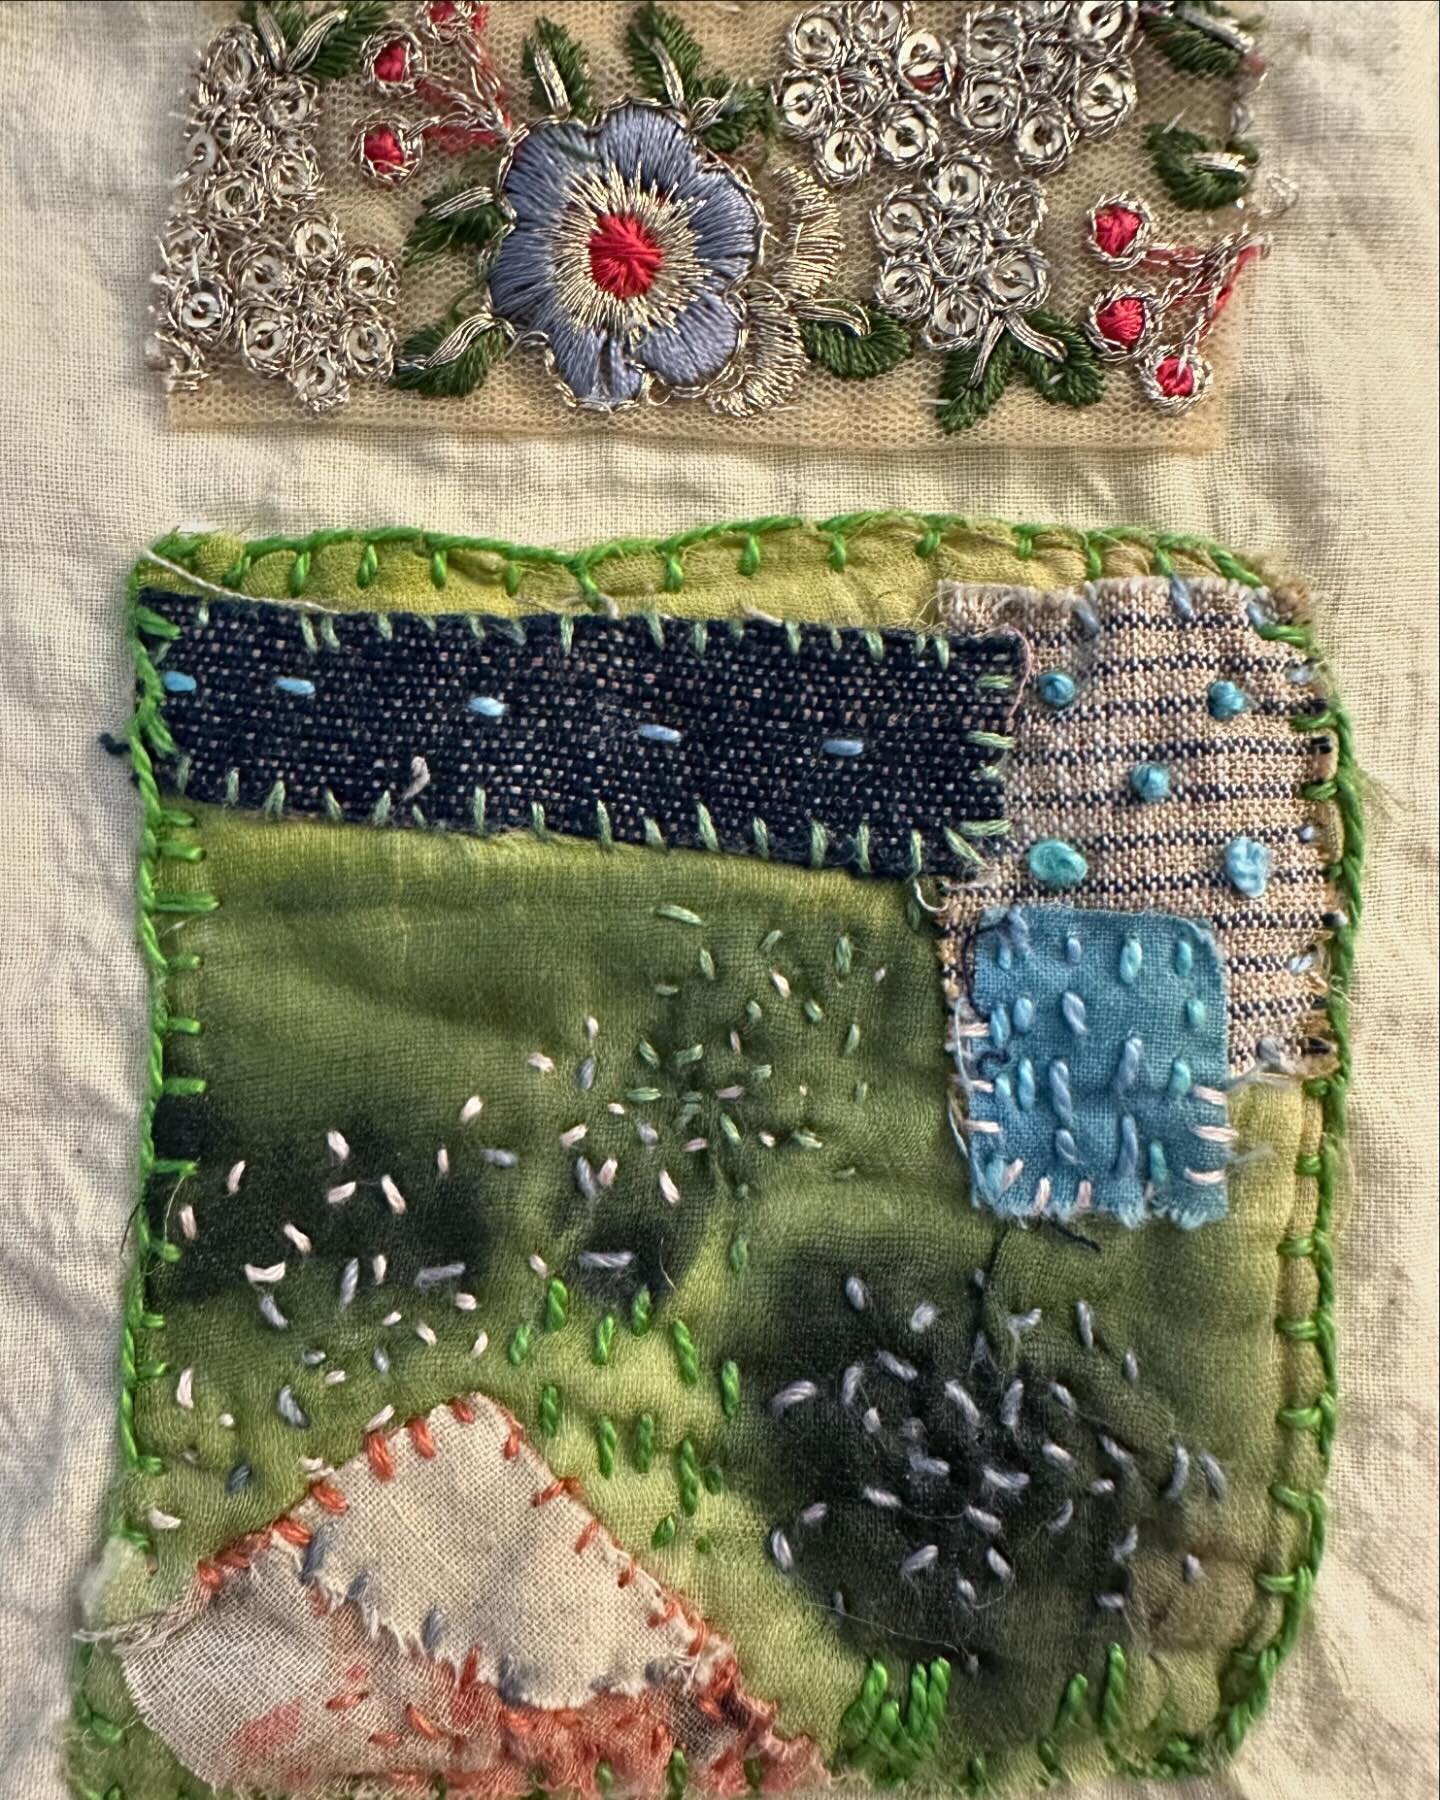 Wanted to share a sweet lil corner of my art practice- using my hand-painted and #collaged fabric as substrate, these small #embroidery compositions are intuitive and sewn onto #handdyed drawstring bags to hold my beloved #tarot decks. Often the deck